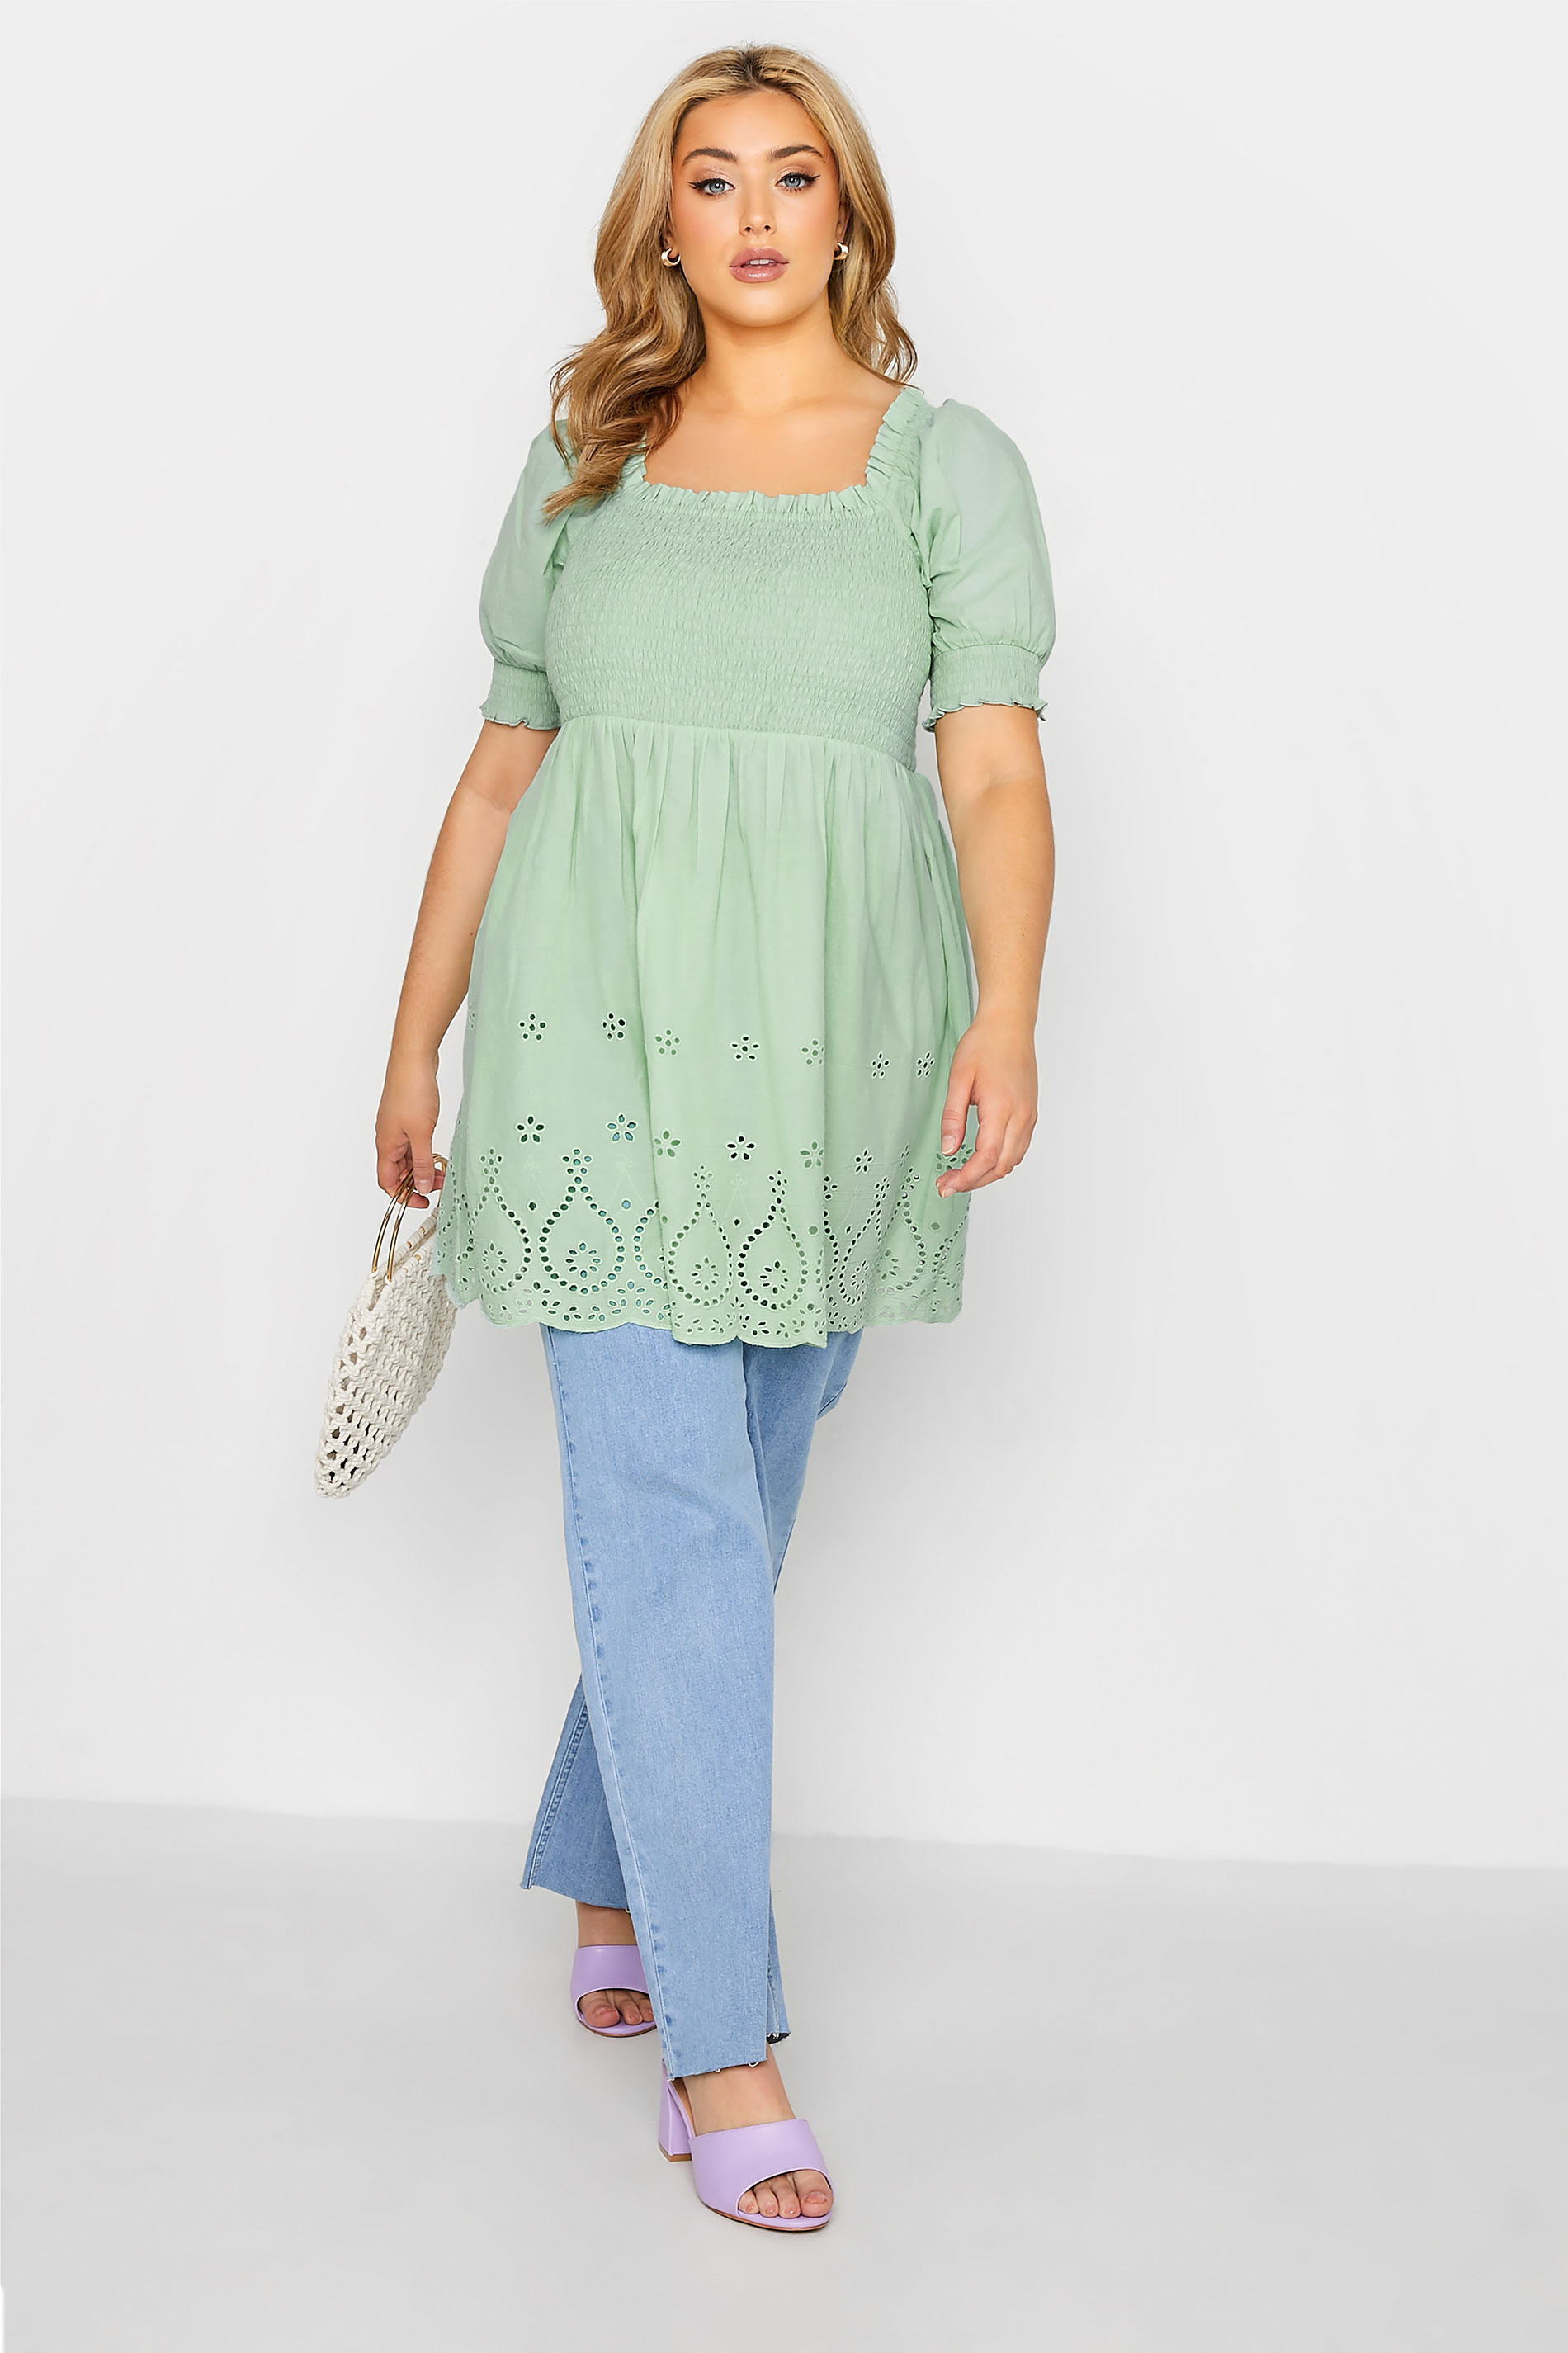 Grande taille  Tops Grande taille  Tops Casual | Top Vert Pastel Broderie Anglaise Manches Courtes - LQ33594